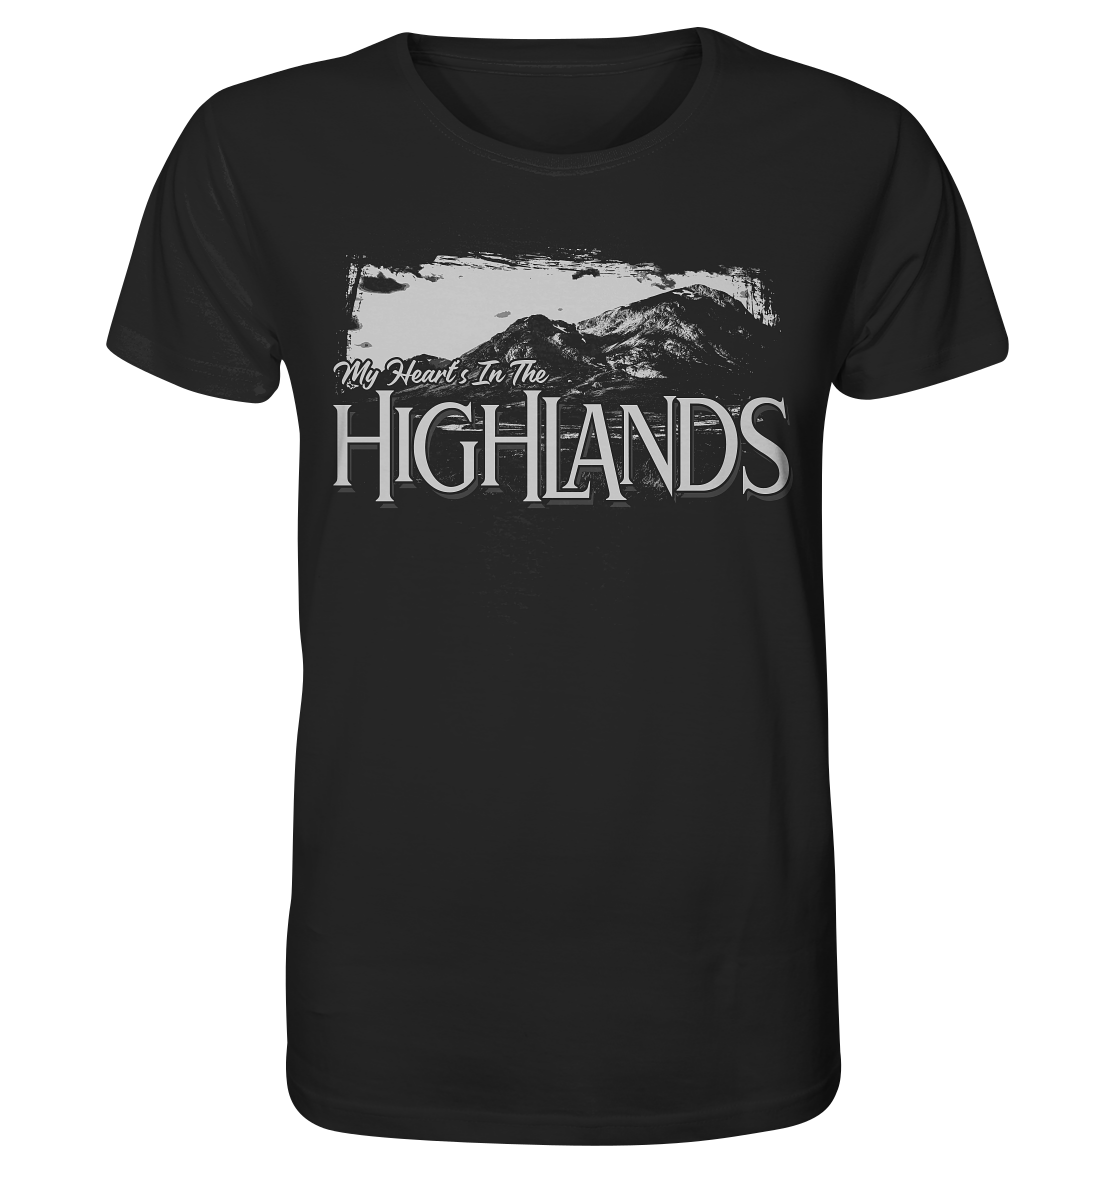 "My Heart's In The Highlands" - Organic Shirt